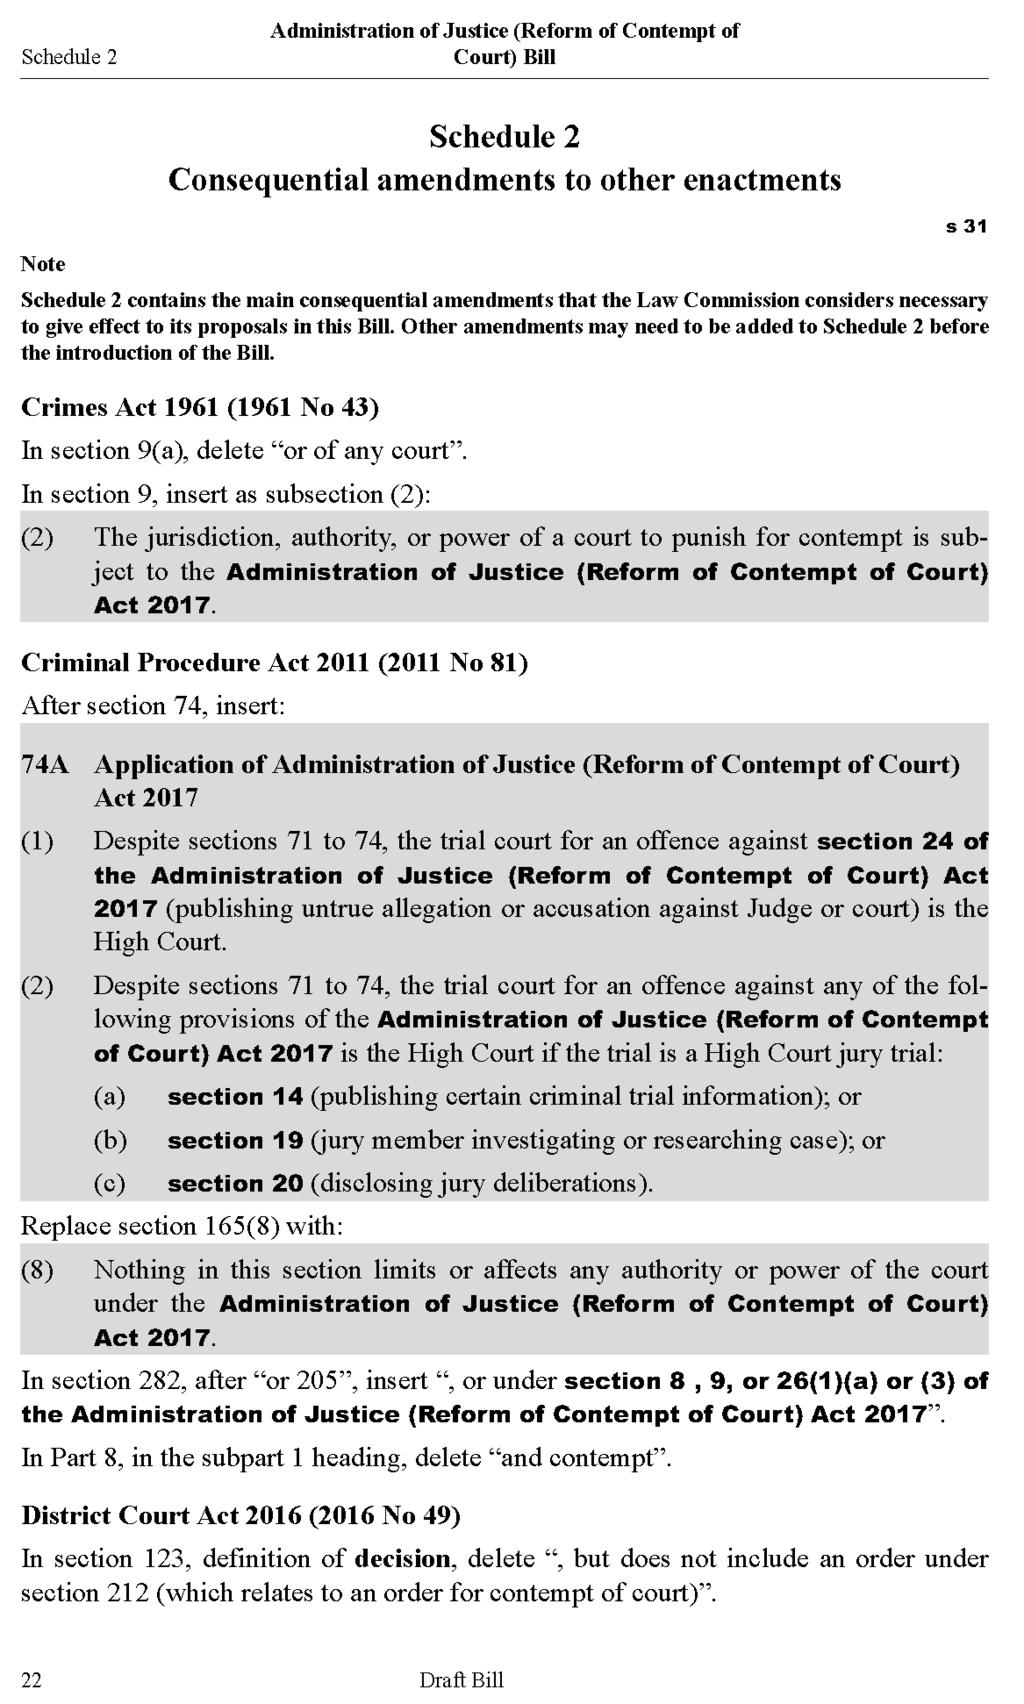 APPENDIX 2: Administration of Justice (Reform of